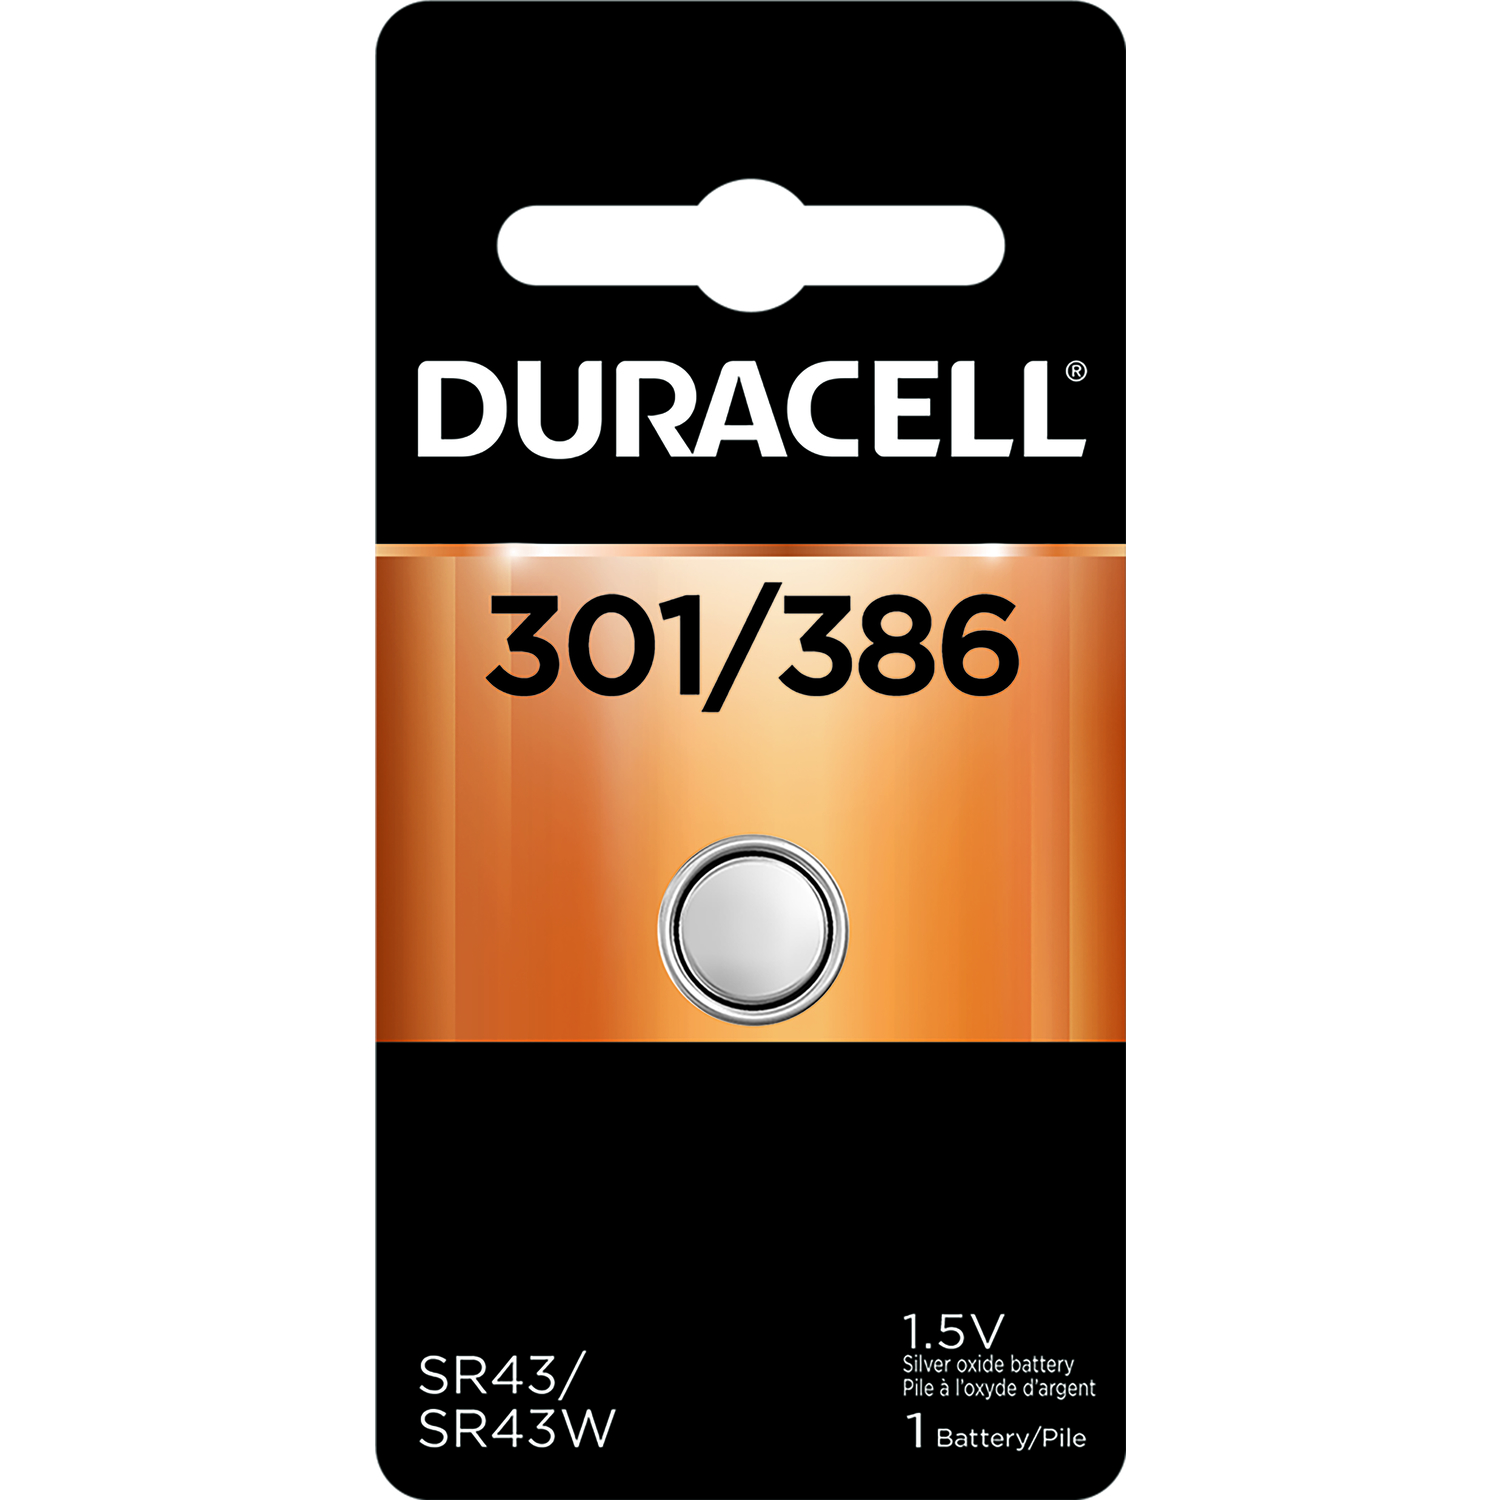 Duracell Silver Oxide 301/386 1.5 V 130 Ah Electronic/Watch Battery 1 pk